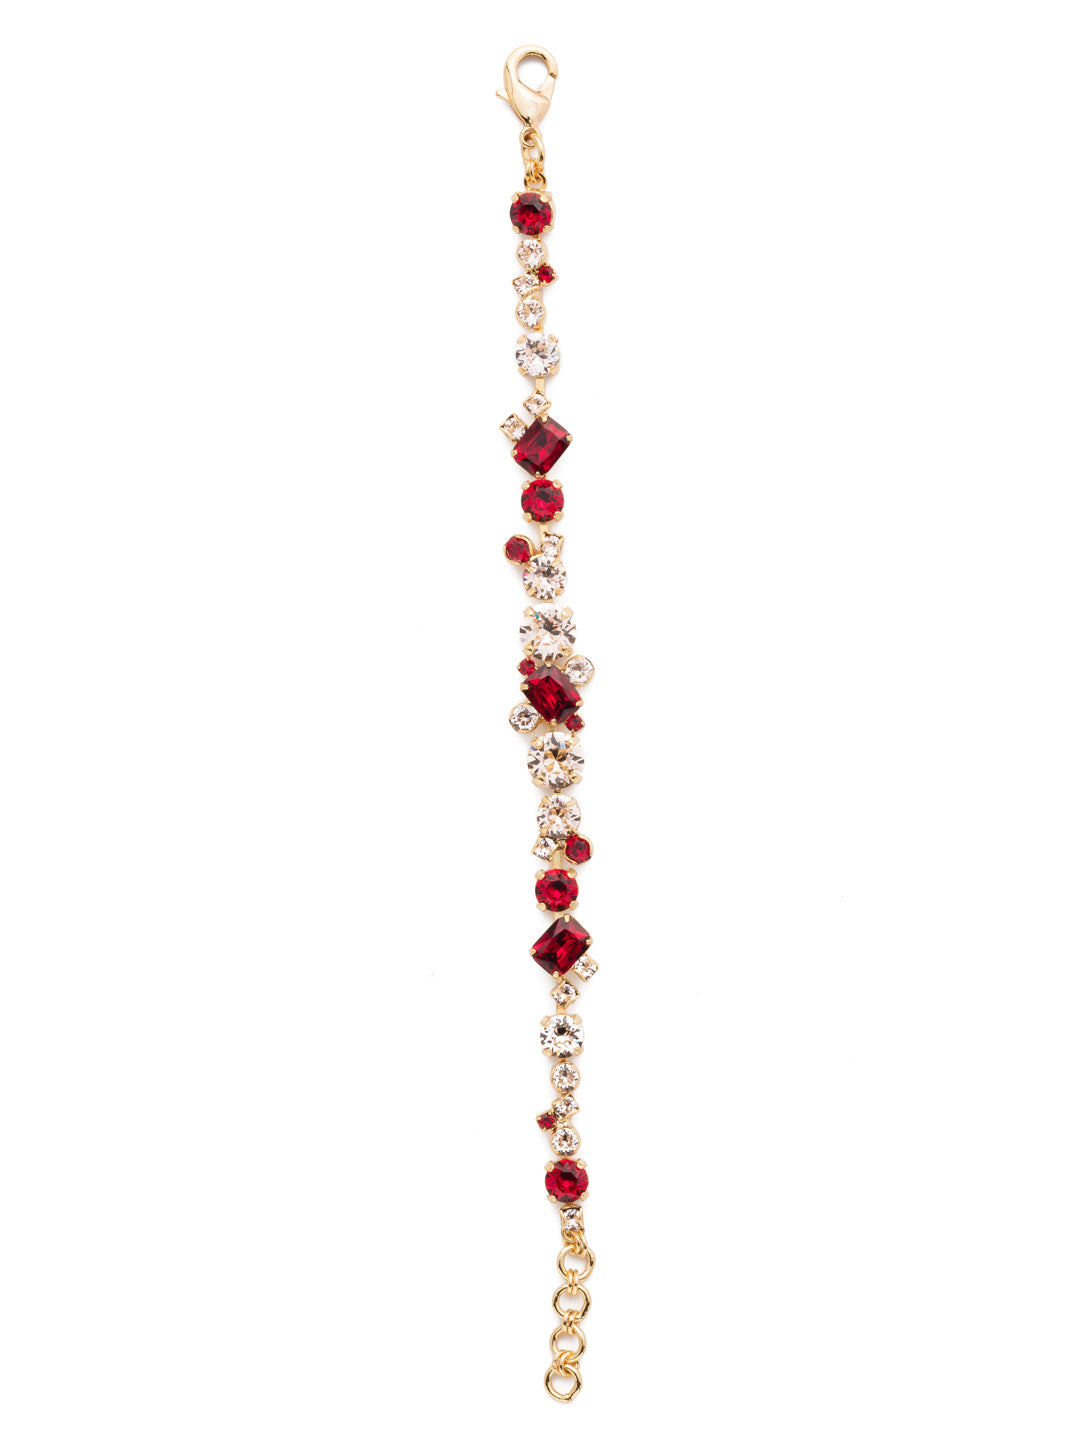 Geo Classic Tennis Bracelet - BDG46BGSRC - <p>Delicate round crystals mix with emerald cut crystals for a classic and elegant look. From Sorrelli's Scarlet Champagne  collection in our Bright Gold-tone finish.</p>